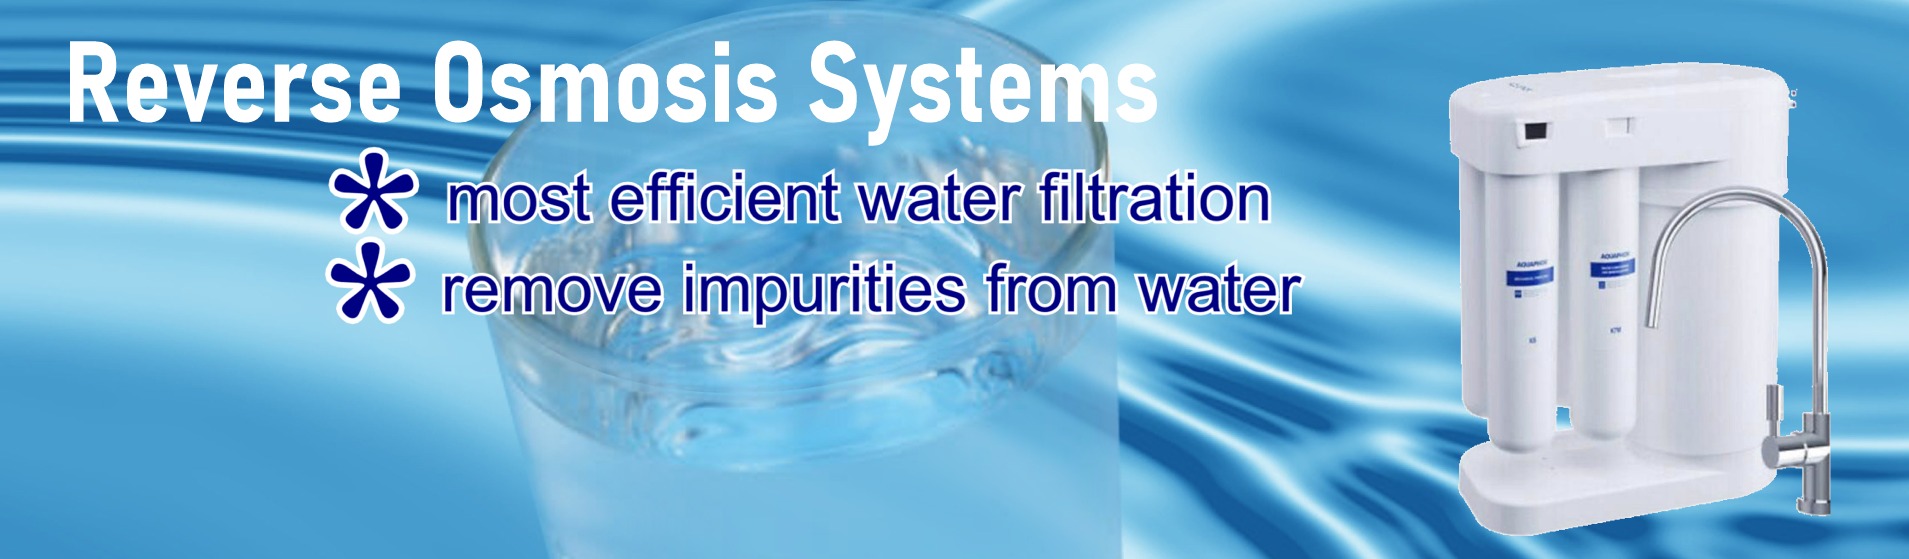 Reverse osmosis systems - most efficient water filtration, remove a wide range of impurities from water - Direct Water Treatment, Co. Kilkenny, Ireland